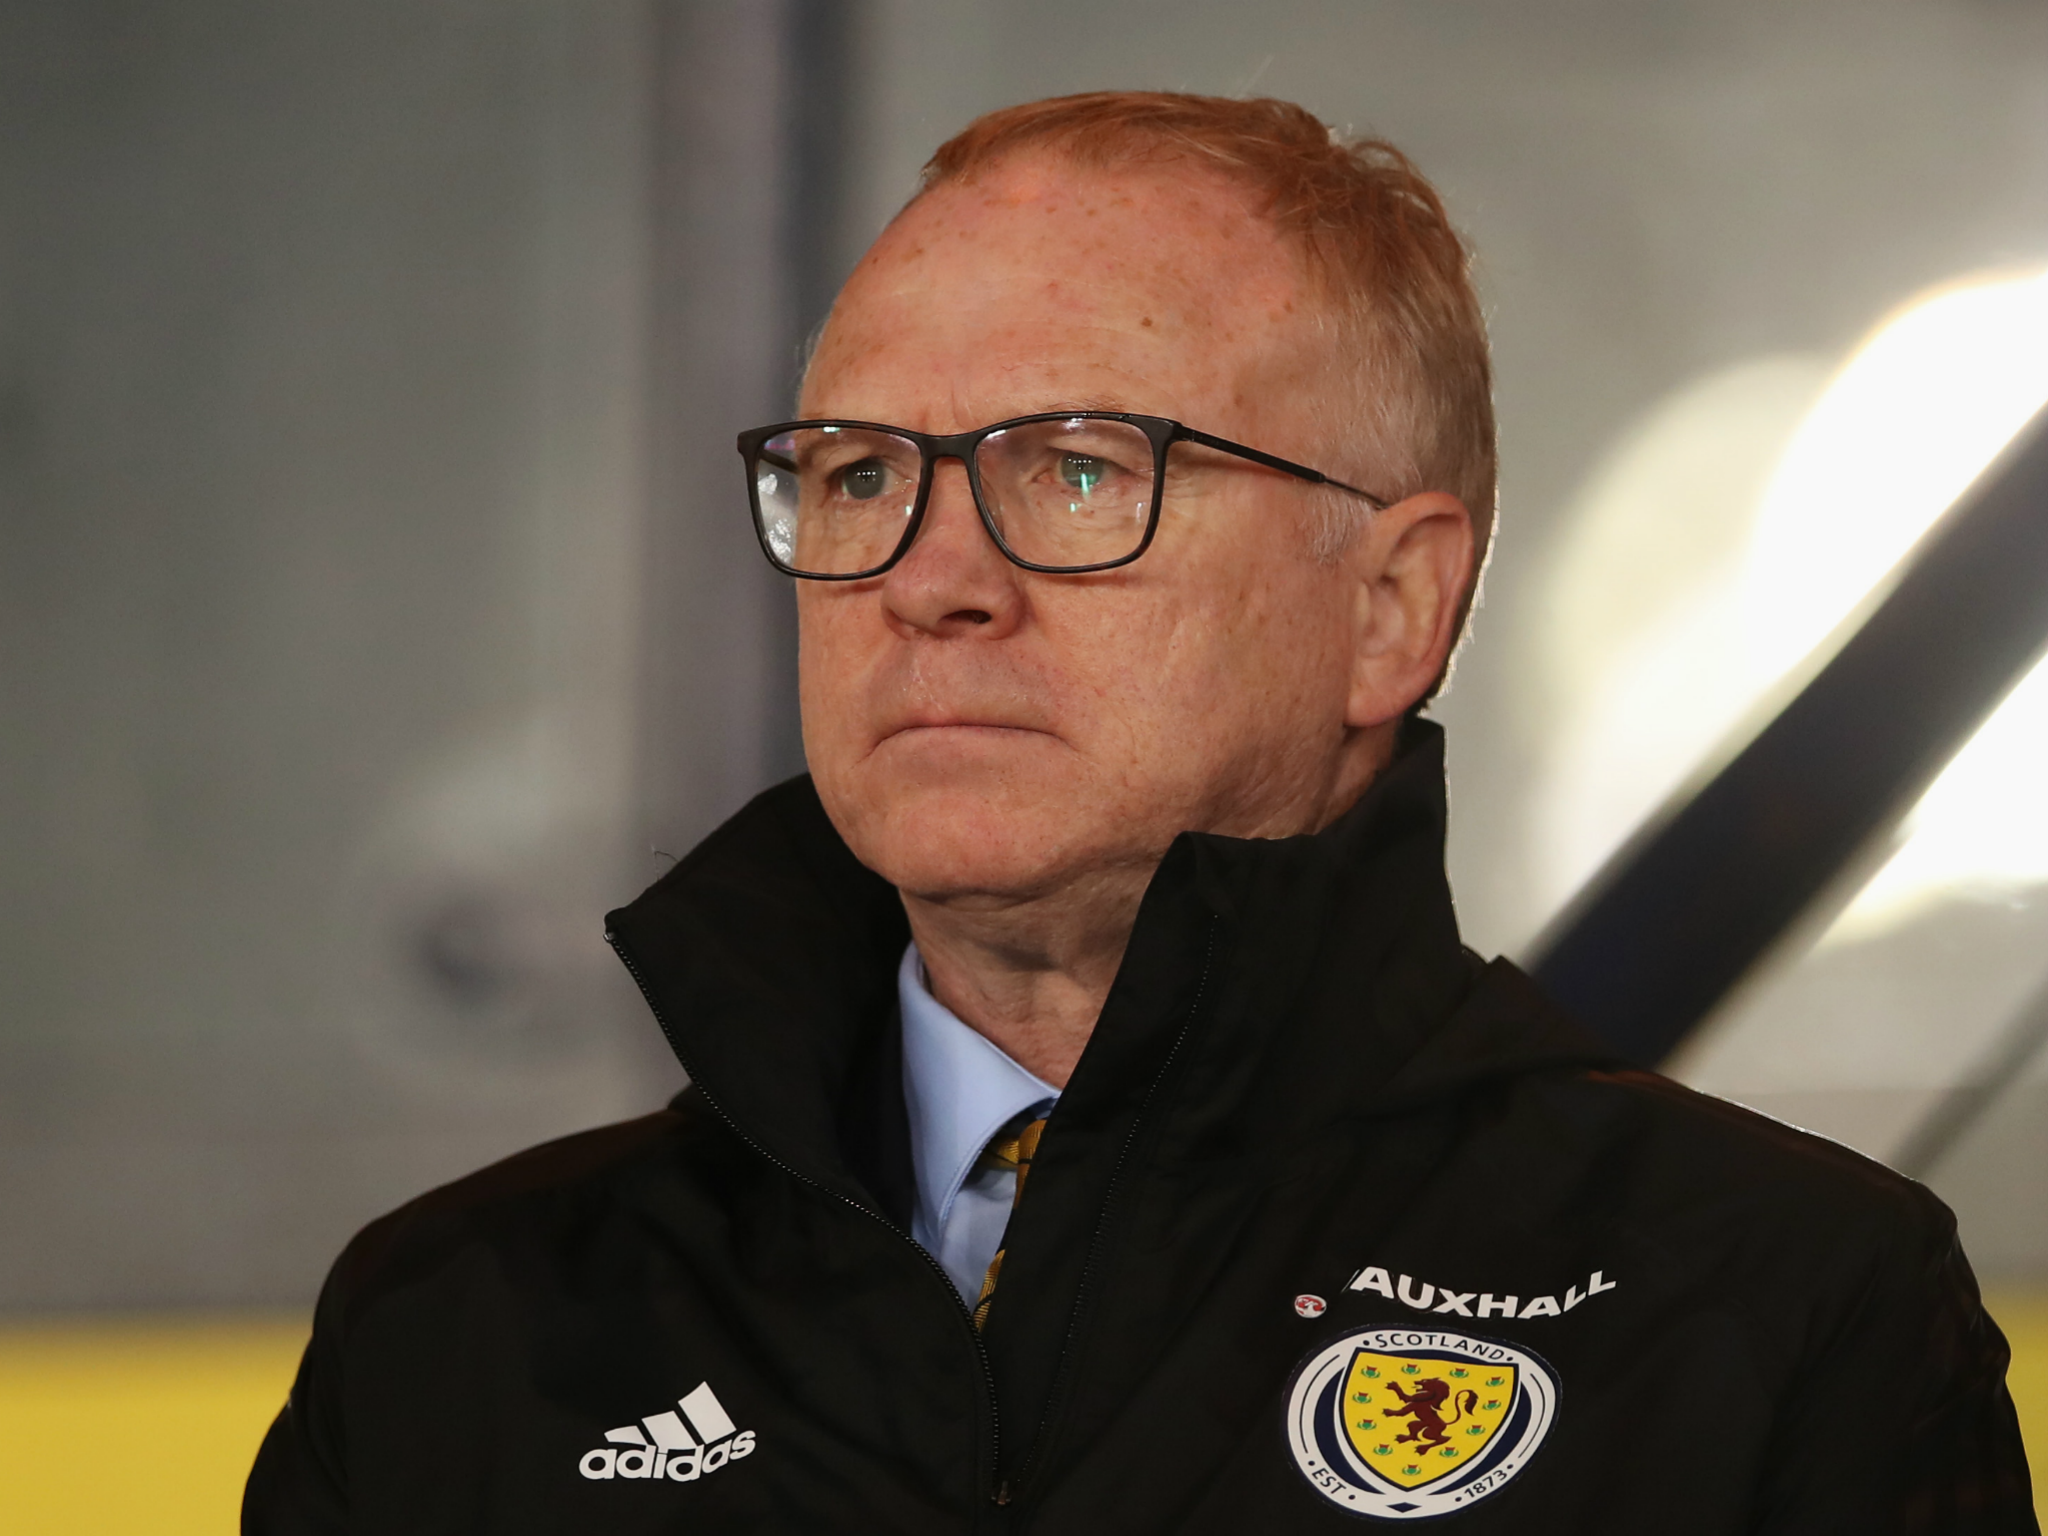 Israel are no mugs, Scotland coach Alex McLeish tells angry supporters after Uefa Nations League defeat